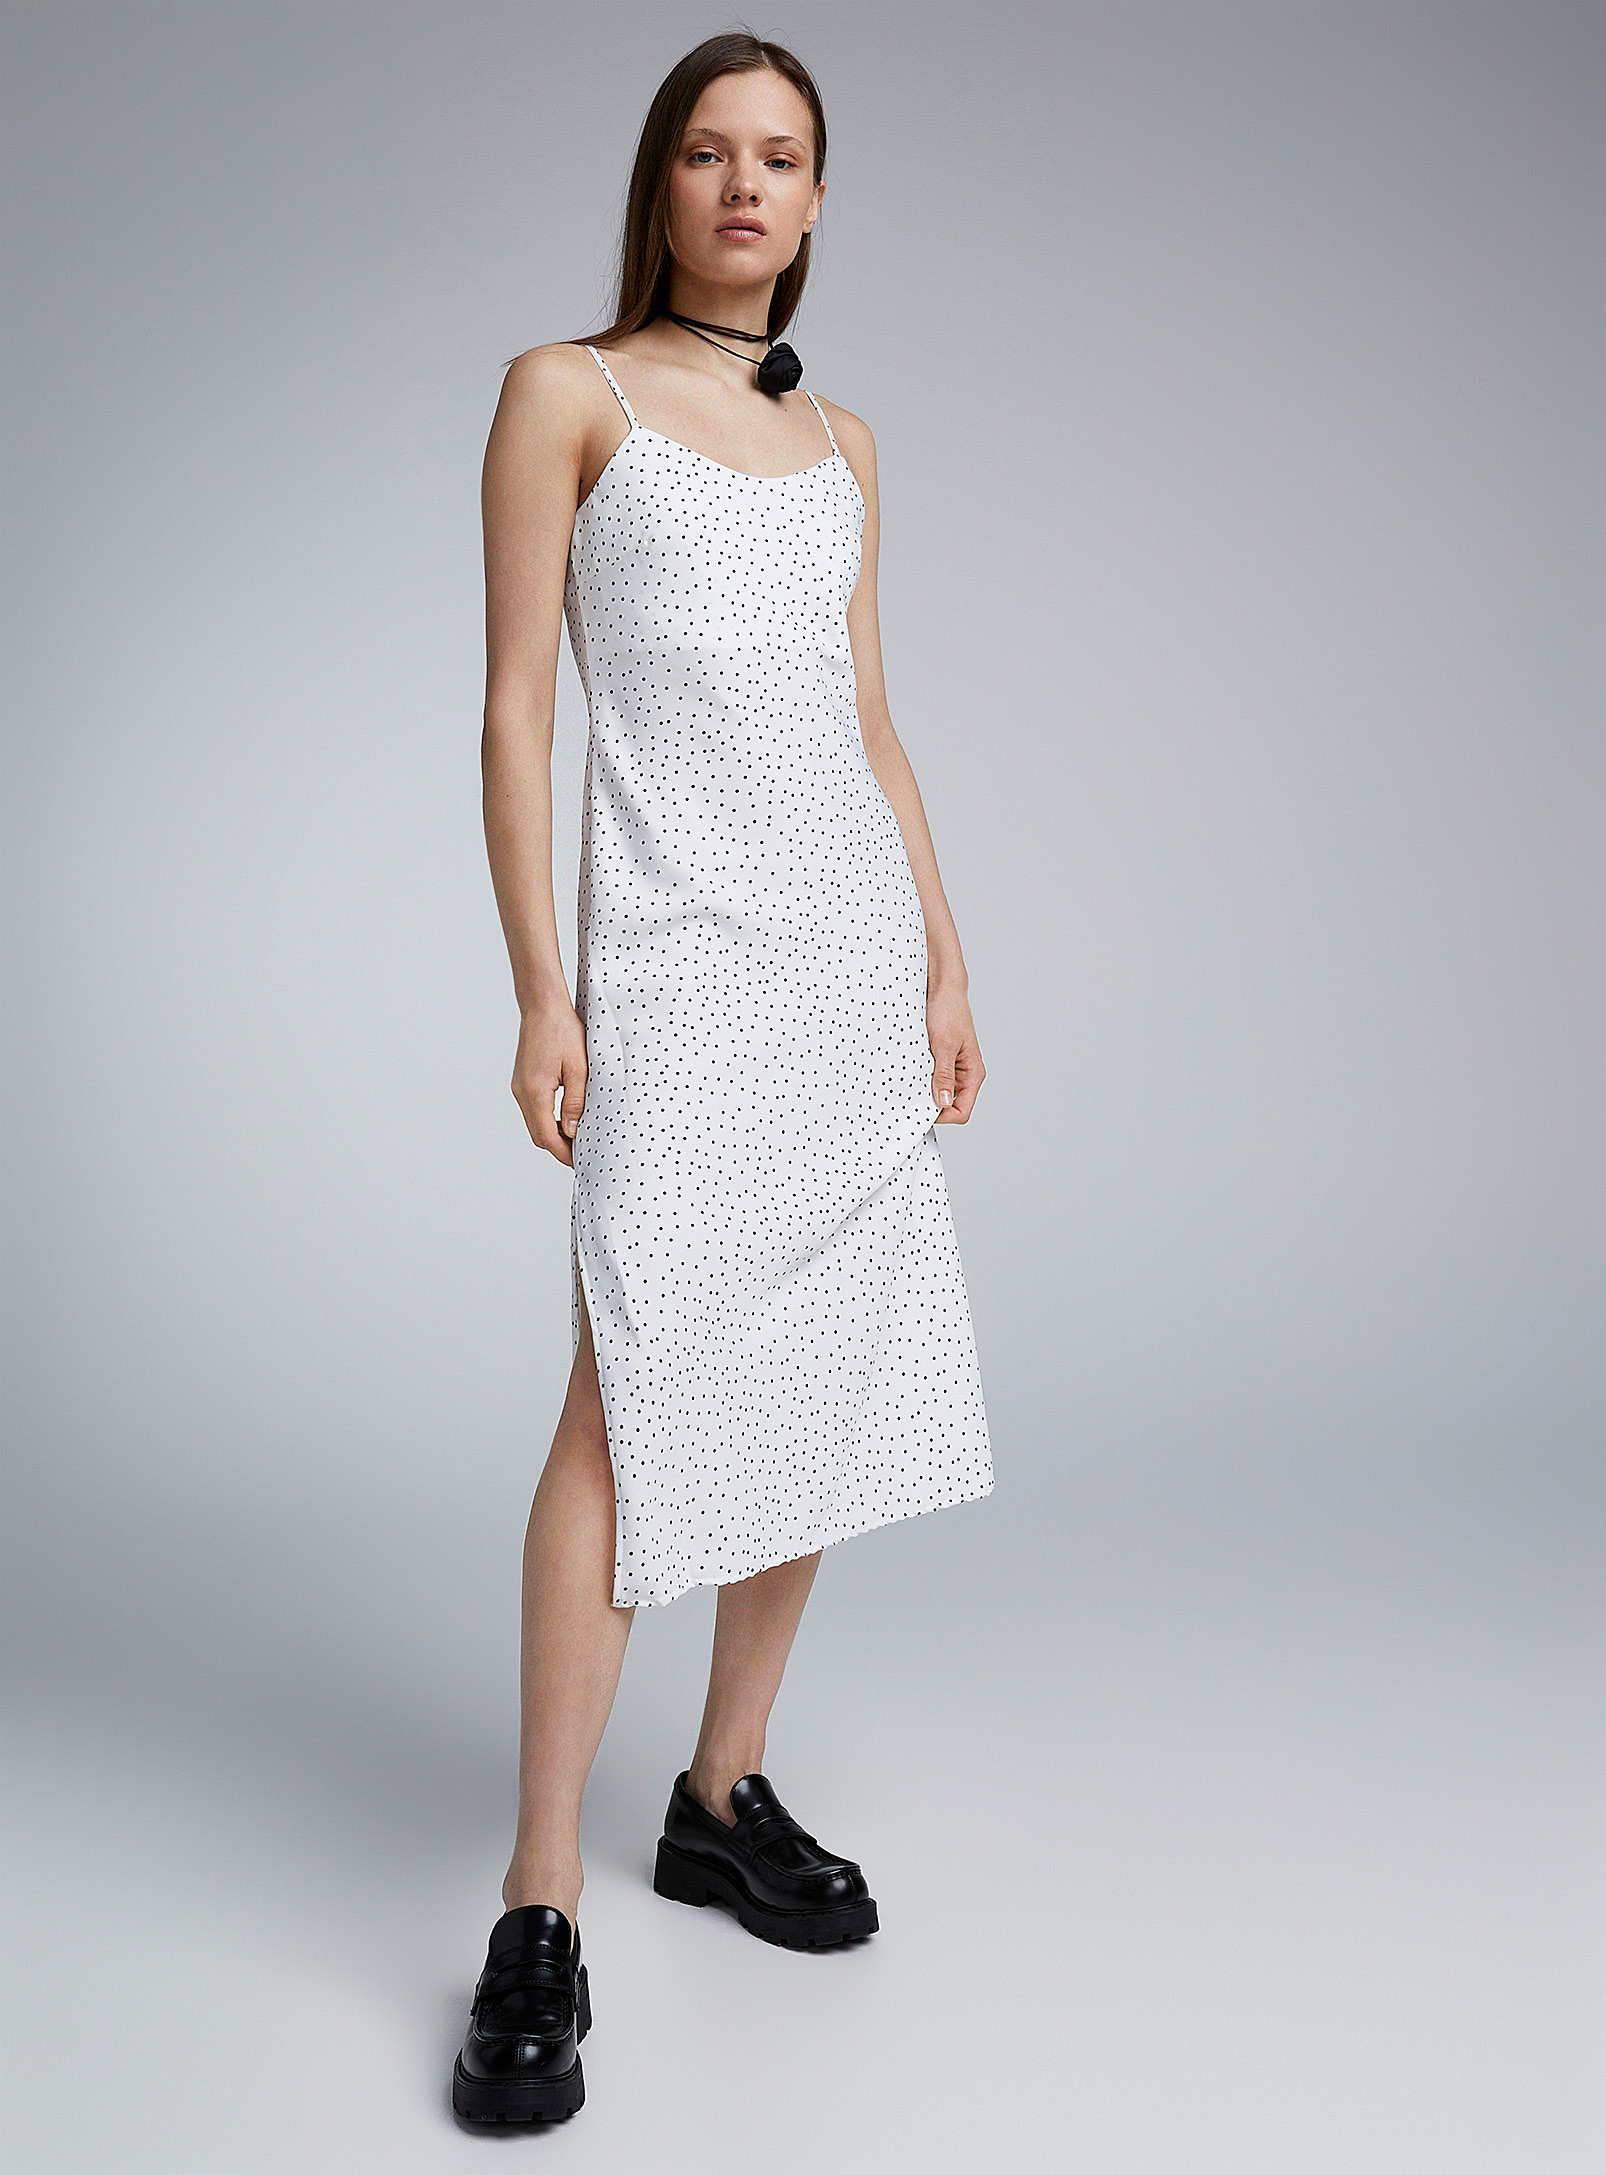 Only Polka Dot Crepe Dress In Black And White